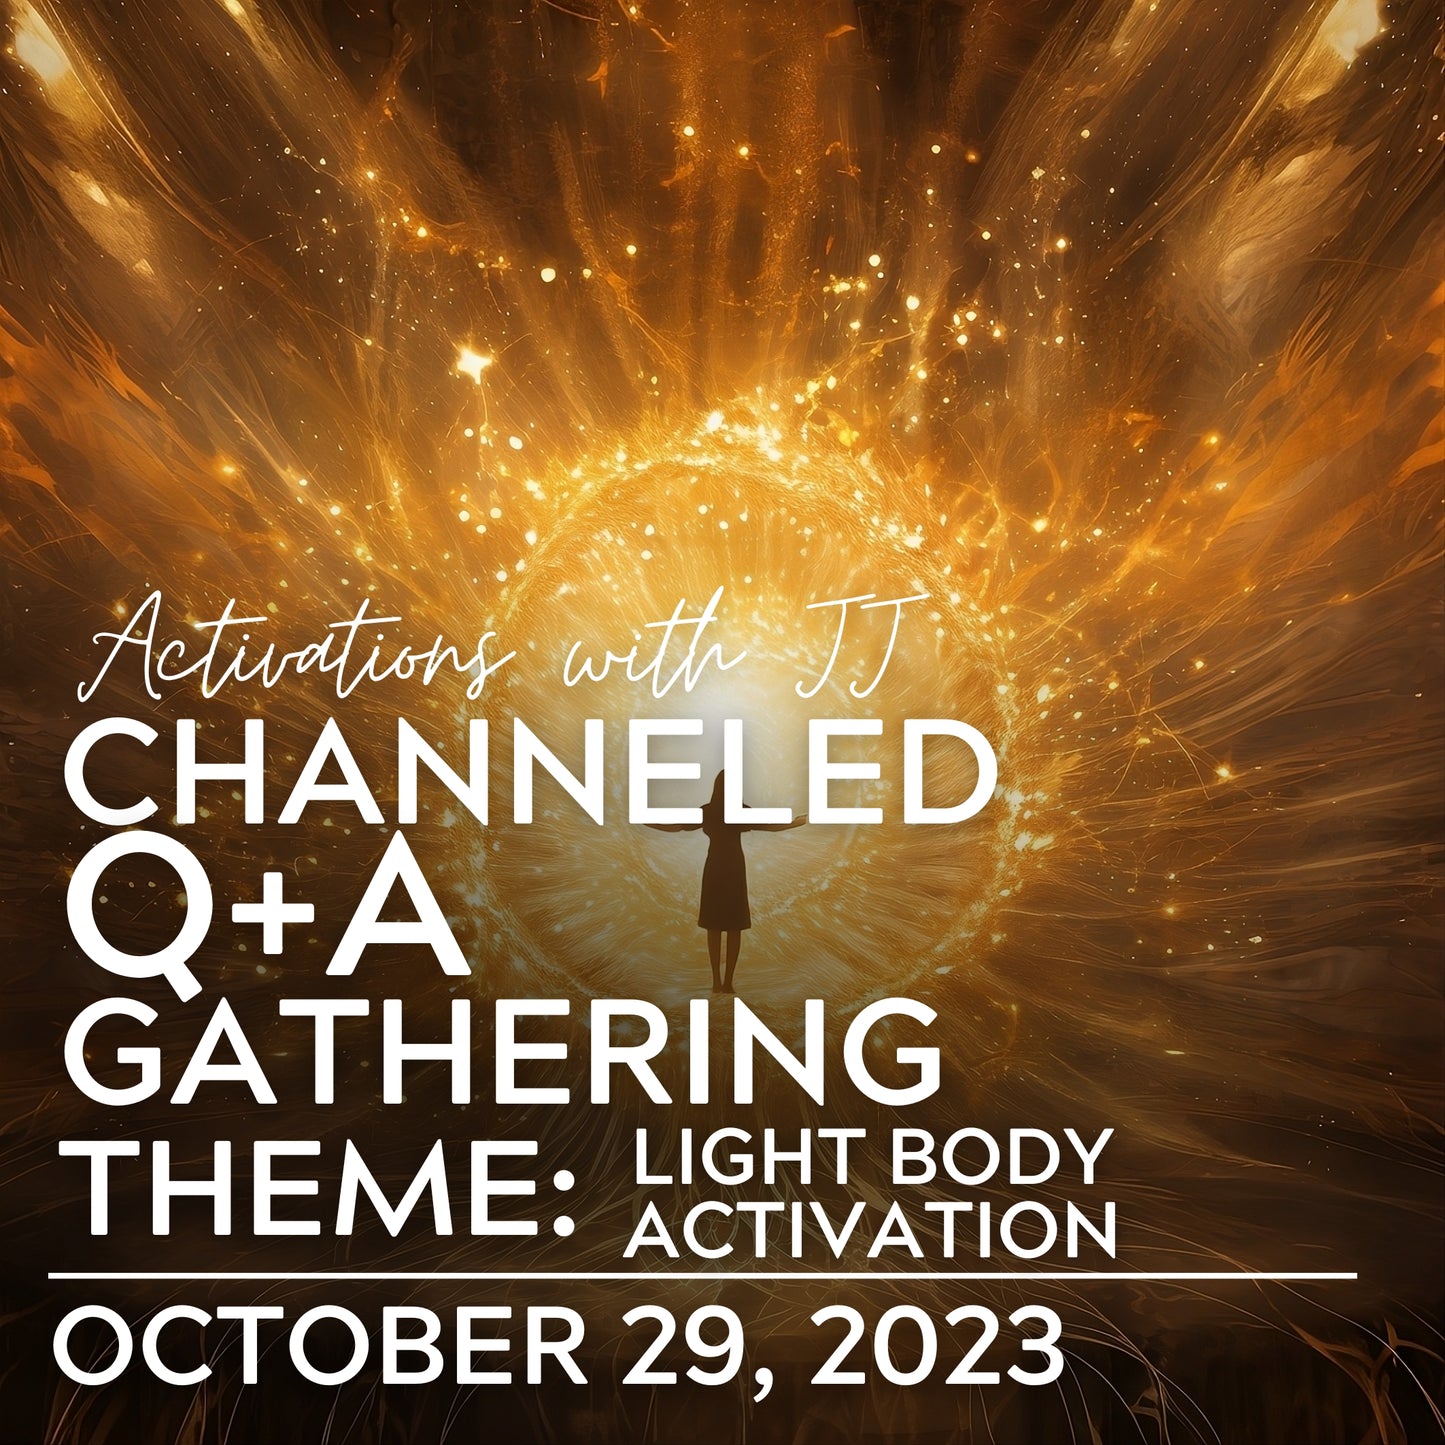 Channeled Q+A Gathering | Theme: Light Body Activation (MP3 Recording) | October 29, 2023